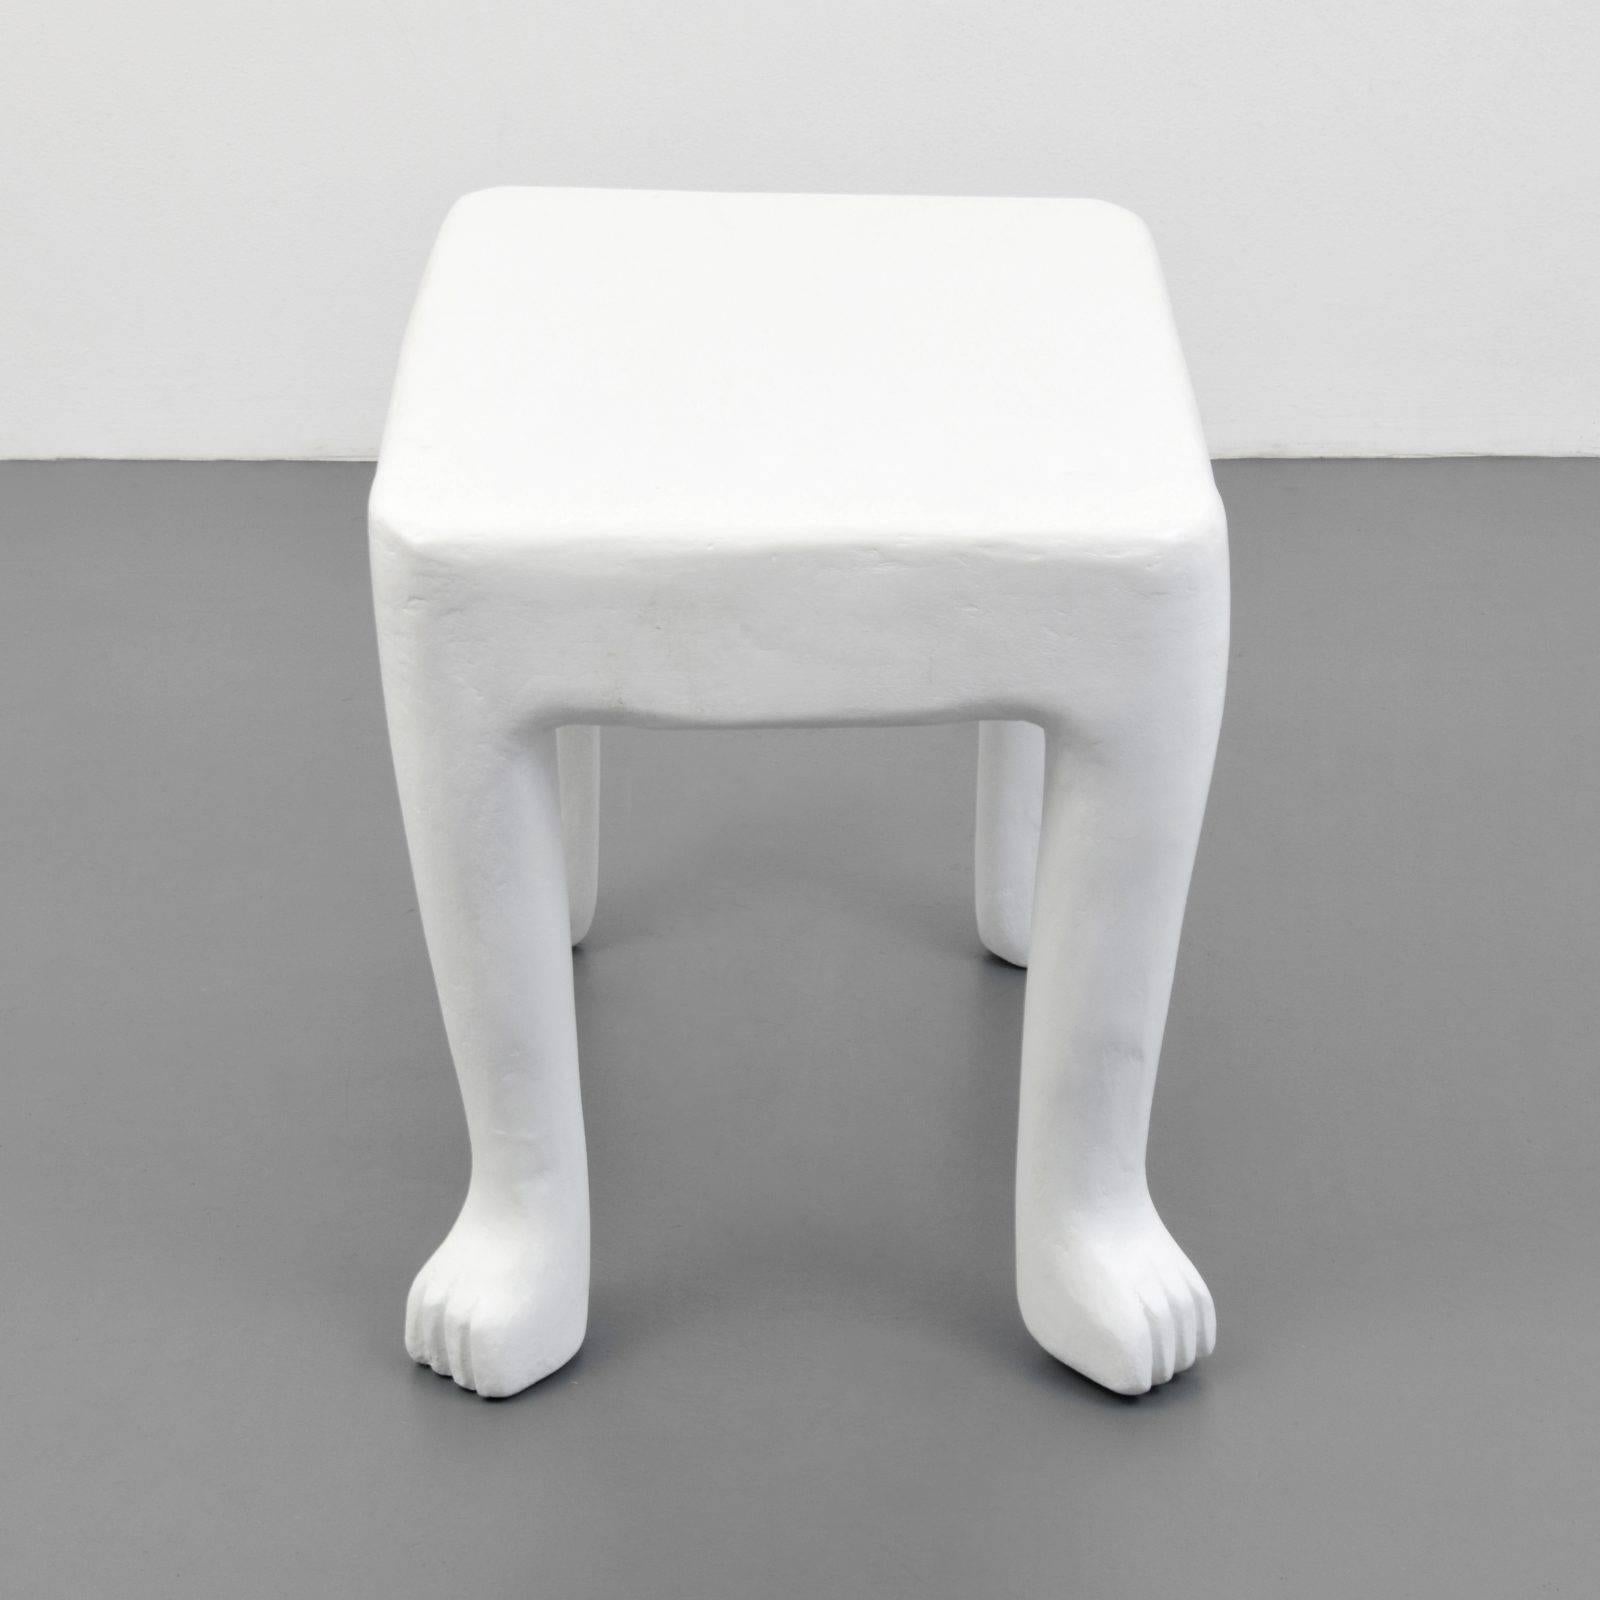 A beautifully preserved plaster “African” end-table by John Dickinson.  One of his most popular and recognizable designs, Dickinson produced these tables from 1976 to 1980. These monochromatic pieces were constructed from a plaster-like high